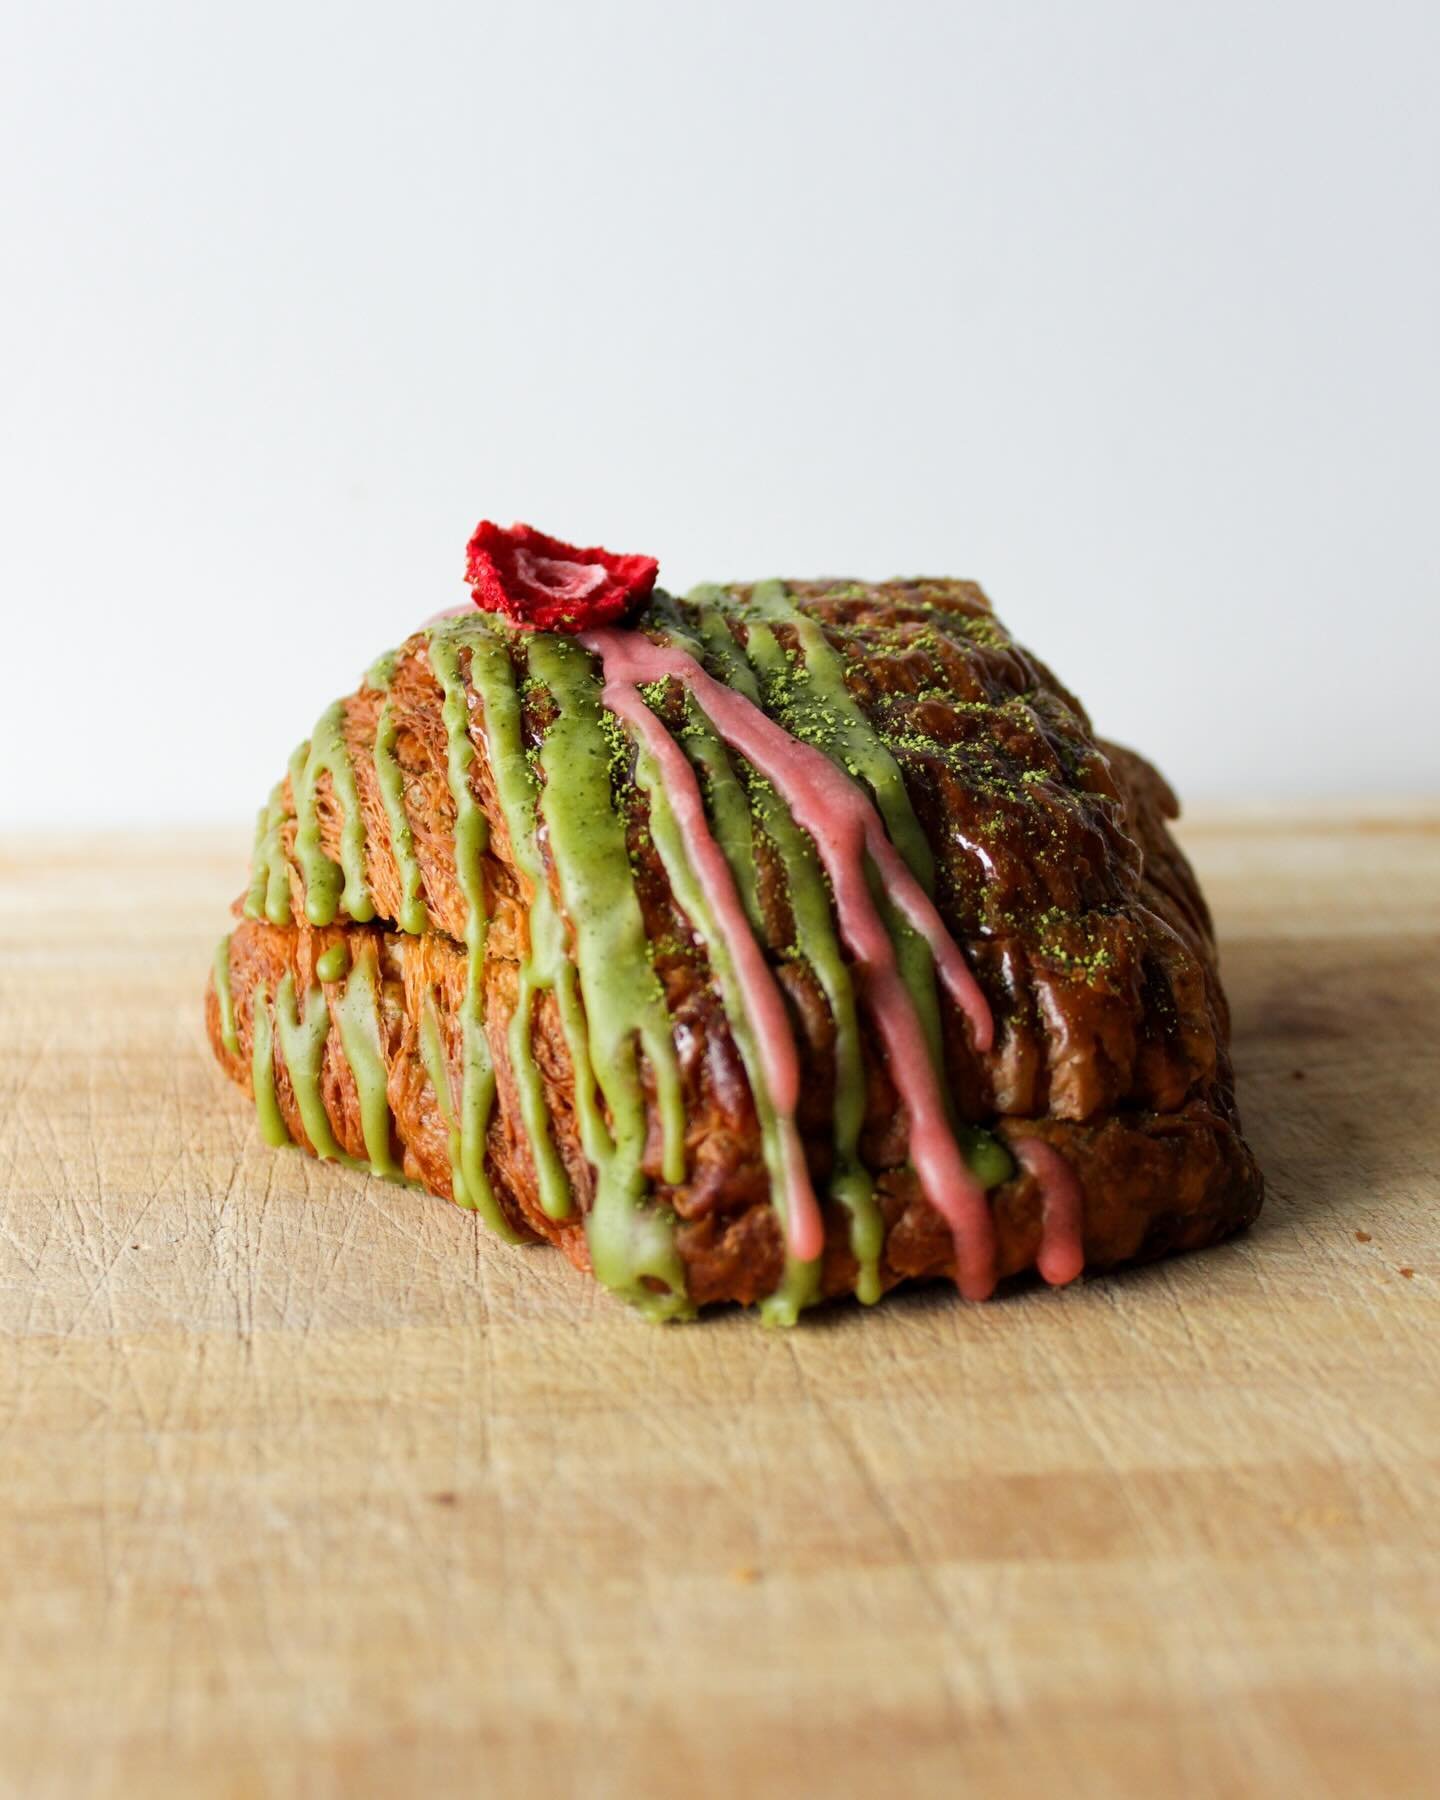 New Strawberry Matcha Twice-Baked Croissant starting this Saturday! House-made strawberry preserves with matcha almond frangipane and topped with a matcha glaze and freeze-dried strawberry.